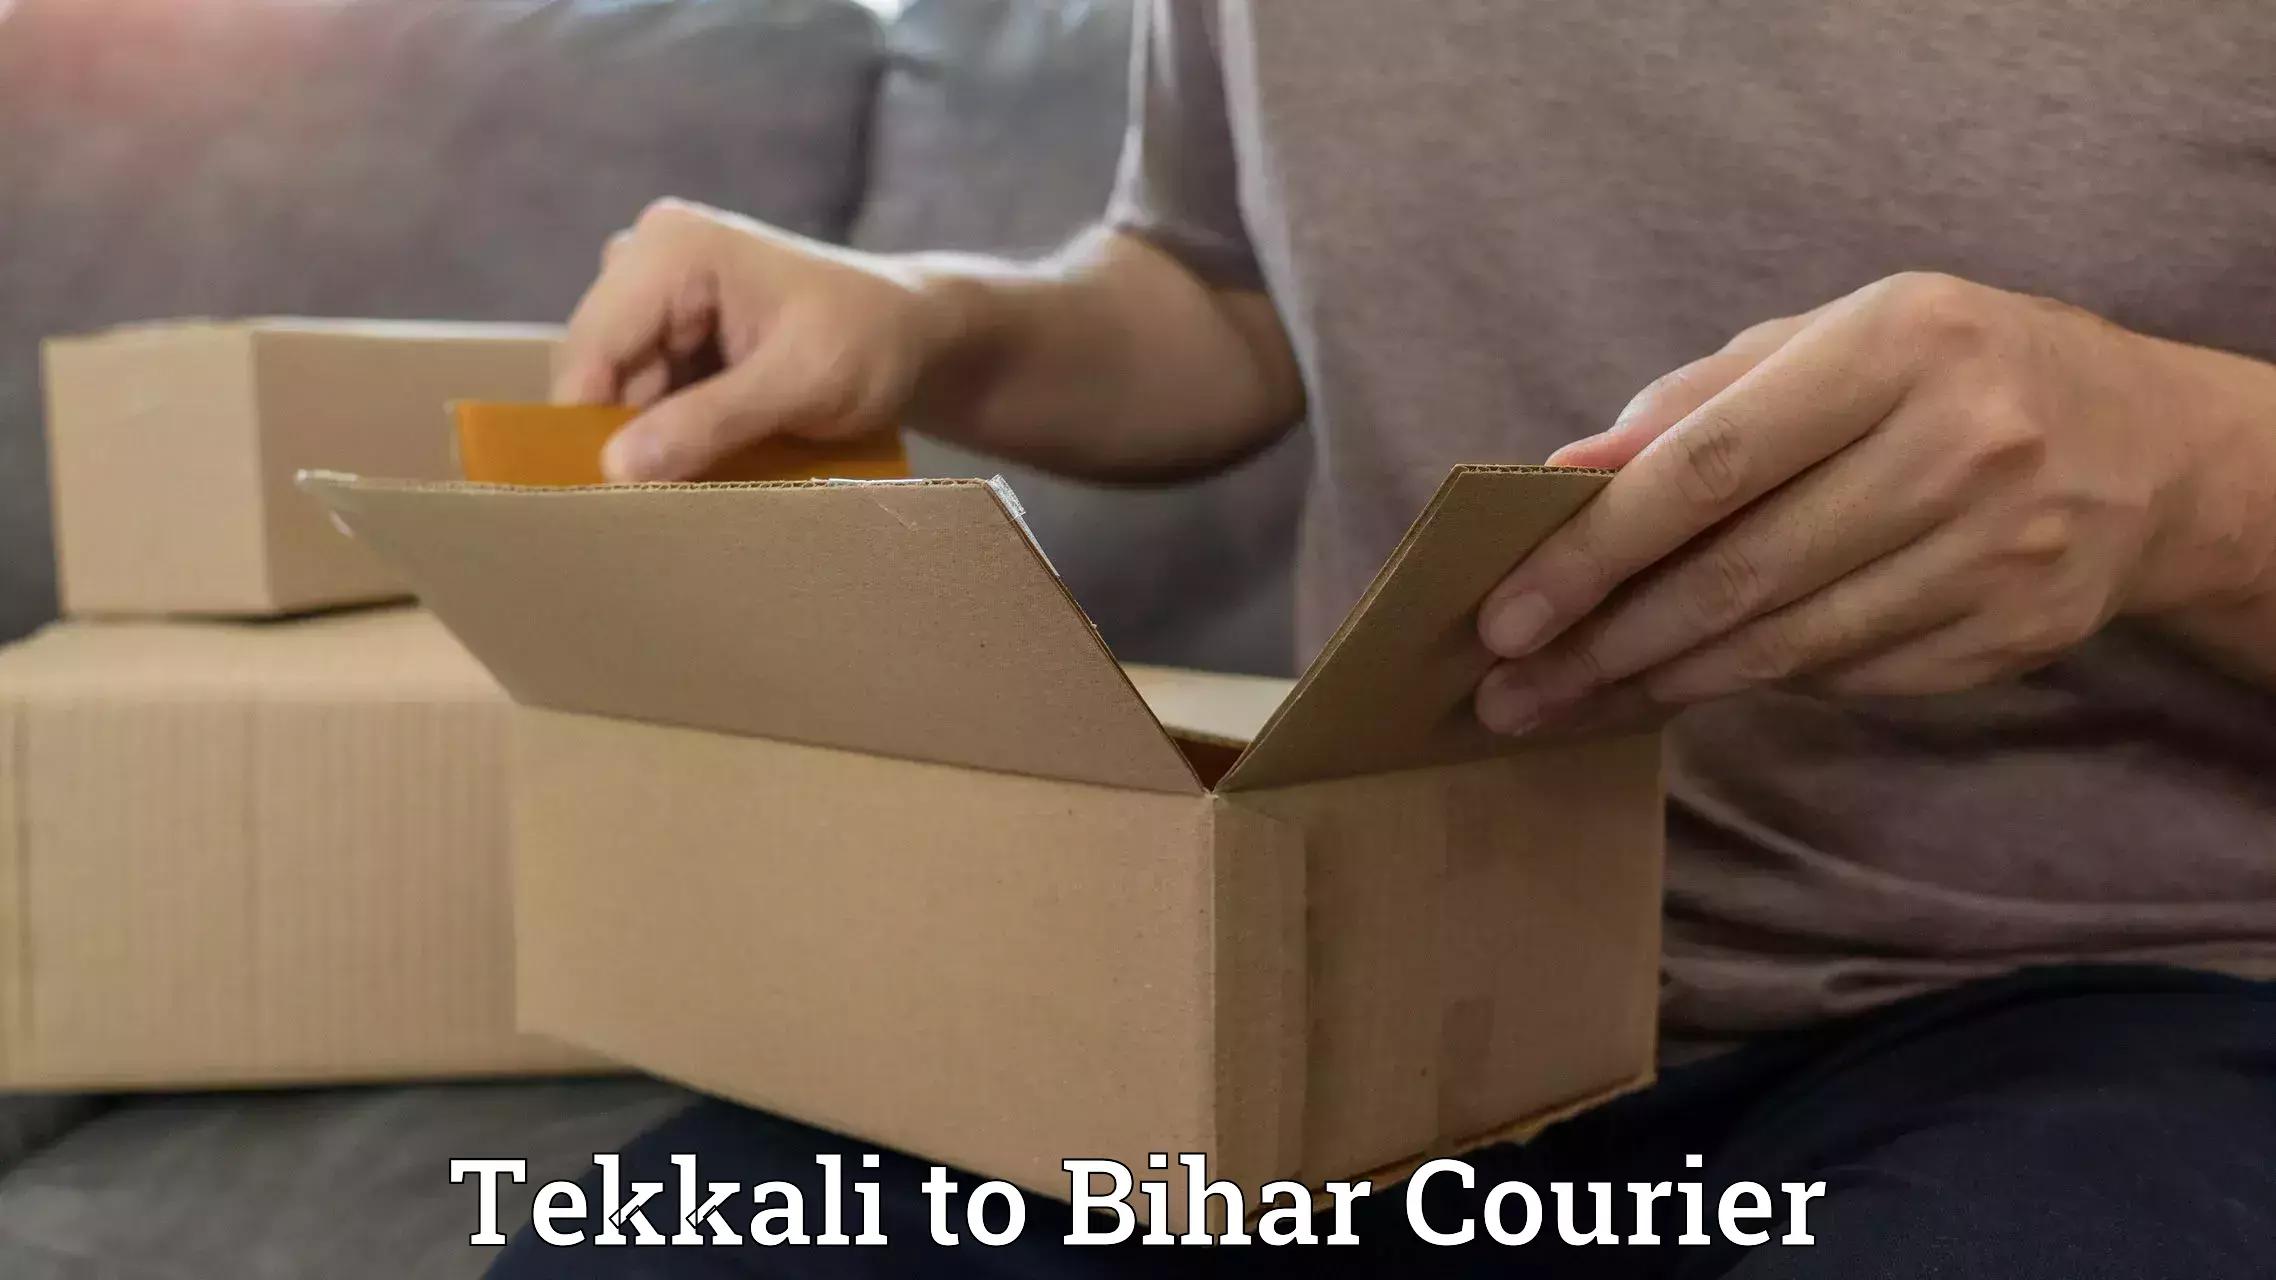 Large-scale shipping solutions Tekkali to Bihar